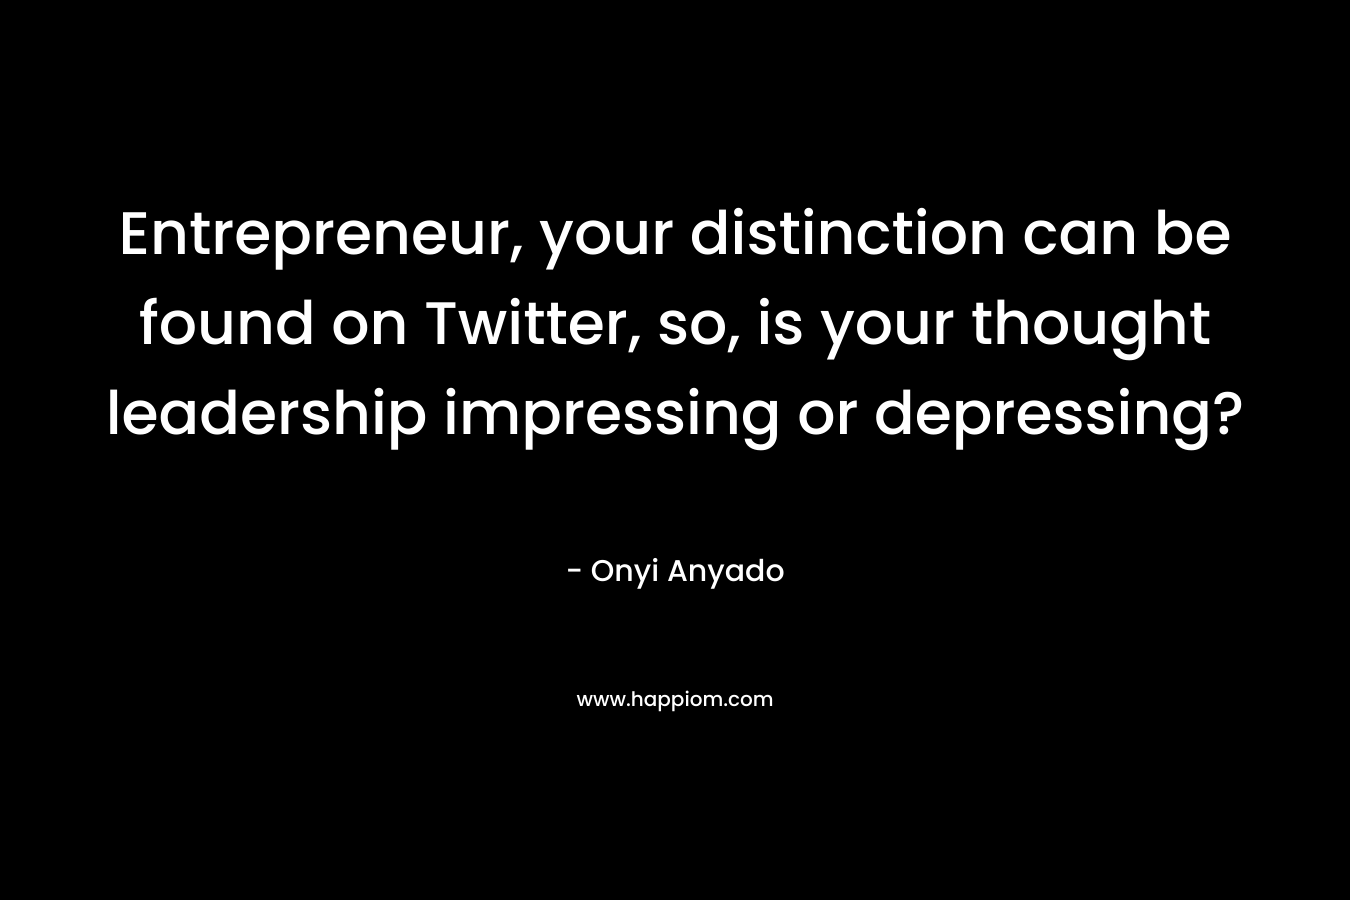 Entrepreneur, your distinction can be found on Twitter, so, is your thought leadership impressing or depressing? – Onyi Anyado